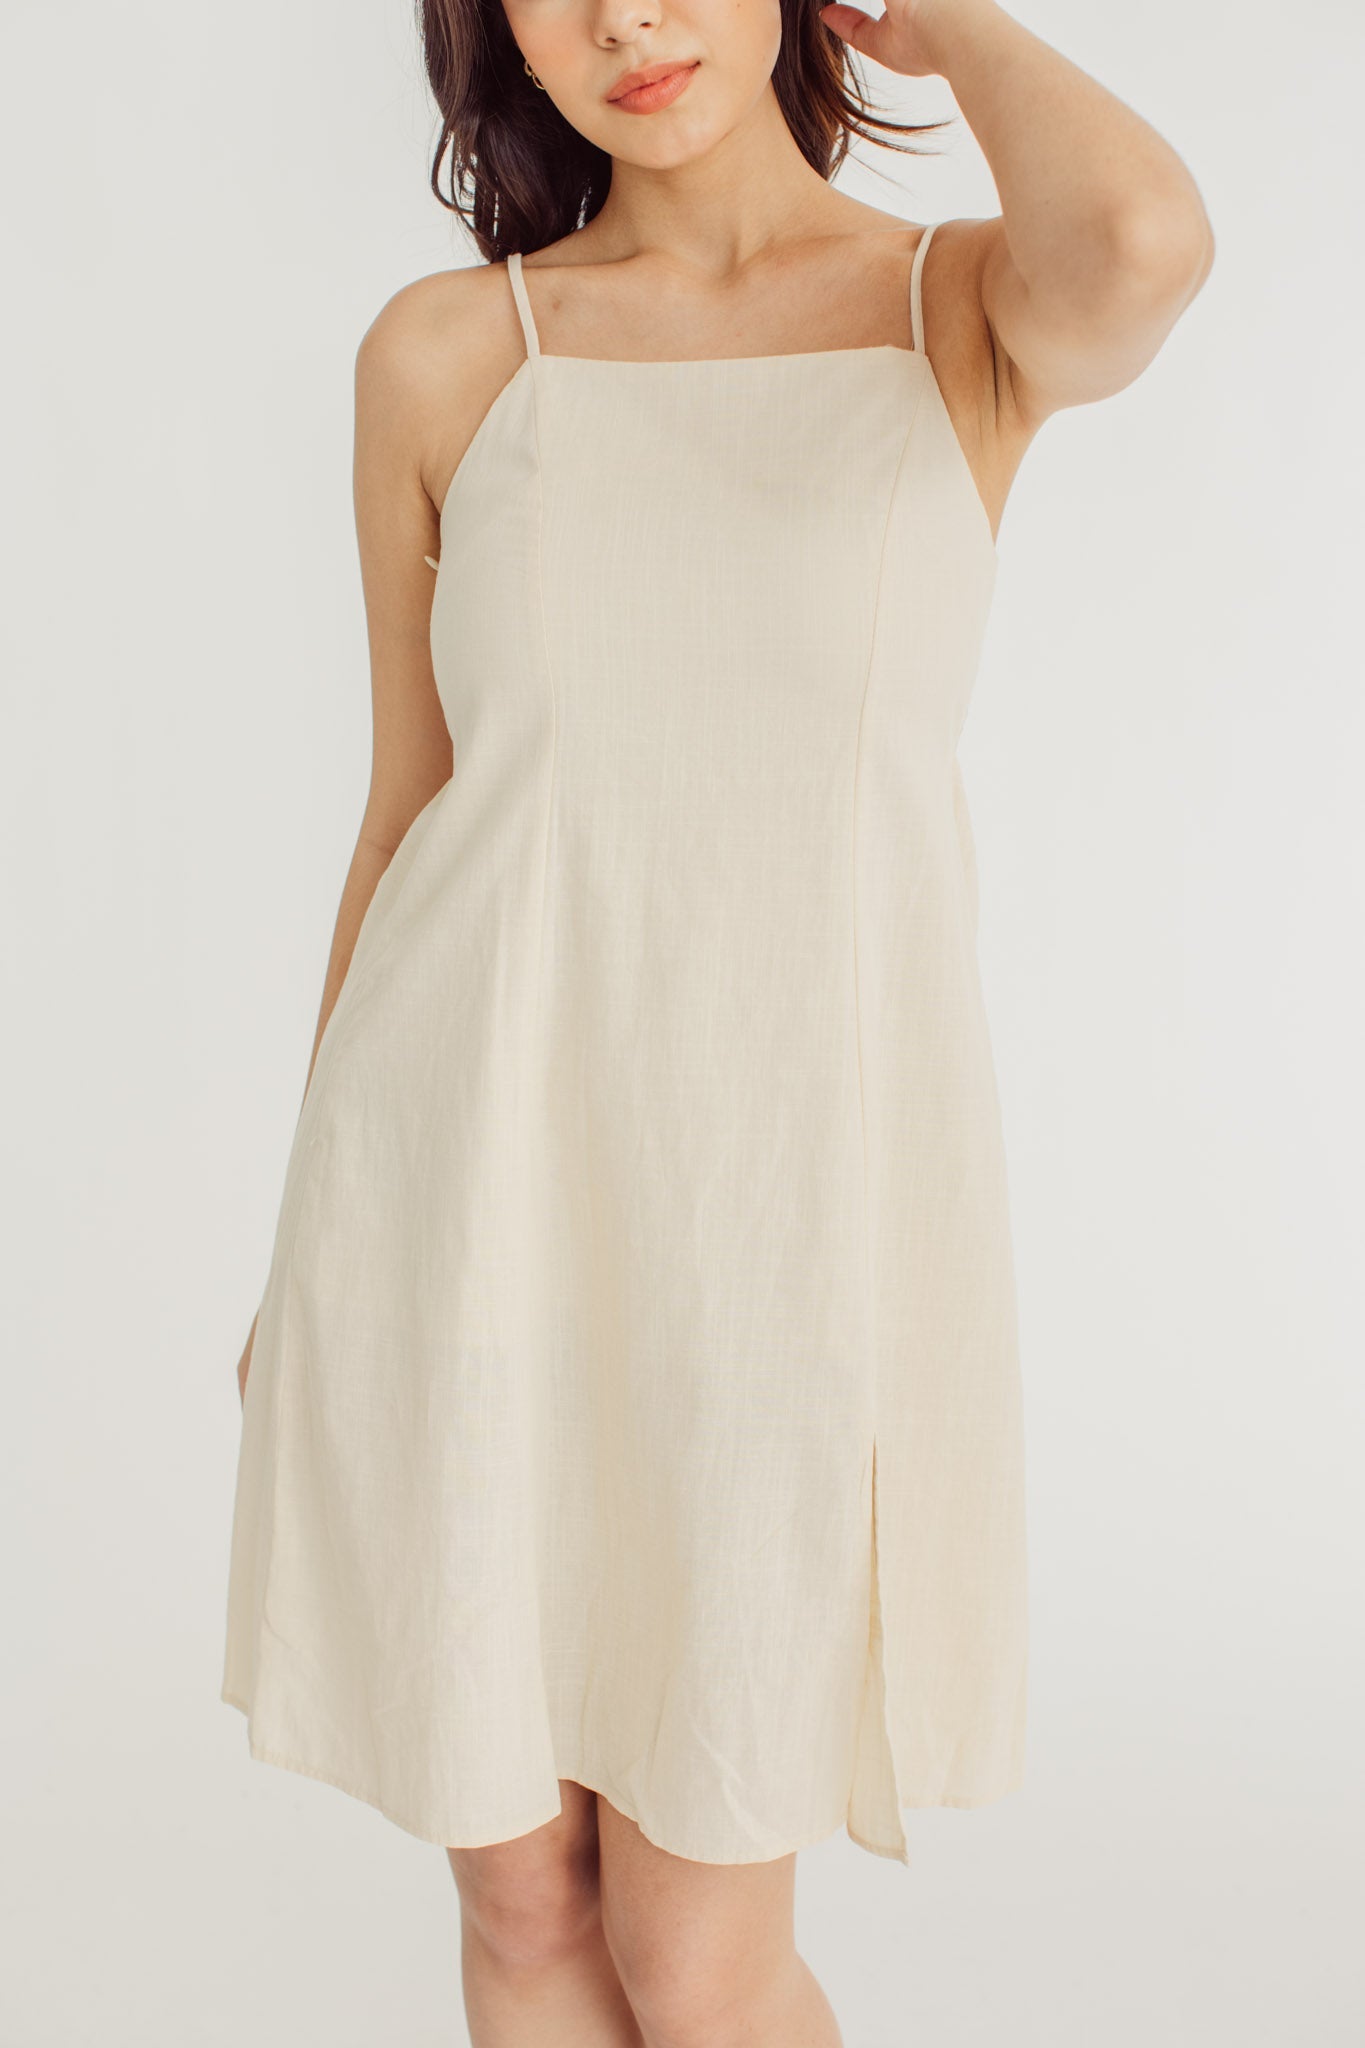 Eunice Beige Square Neck Dress with Front Slit - Mossimo PH